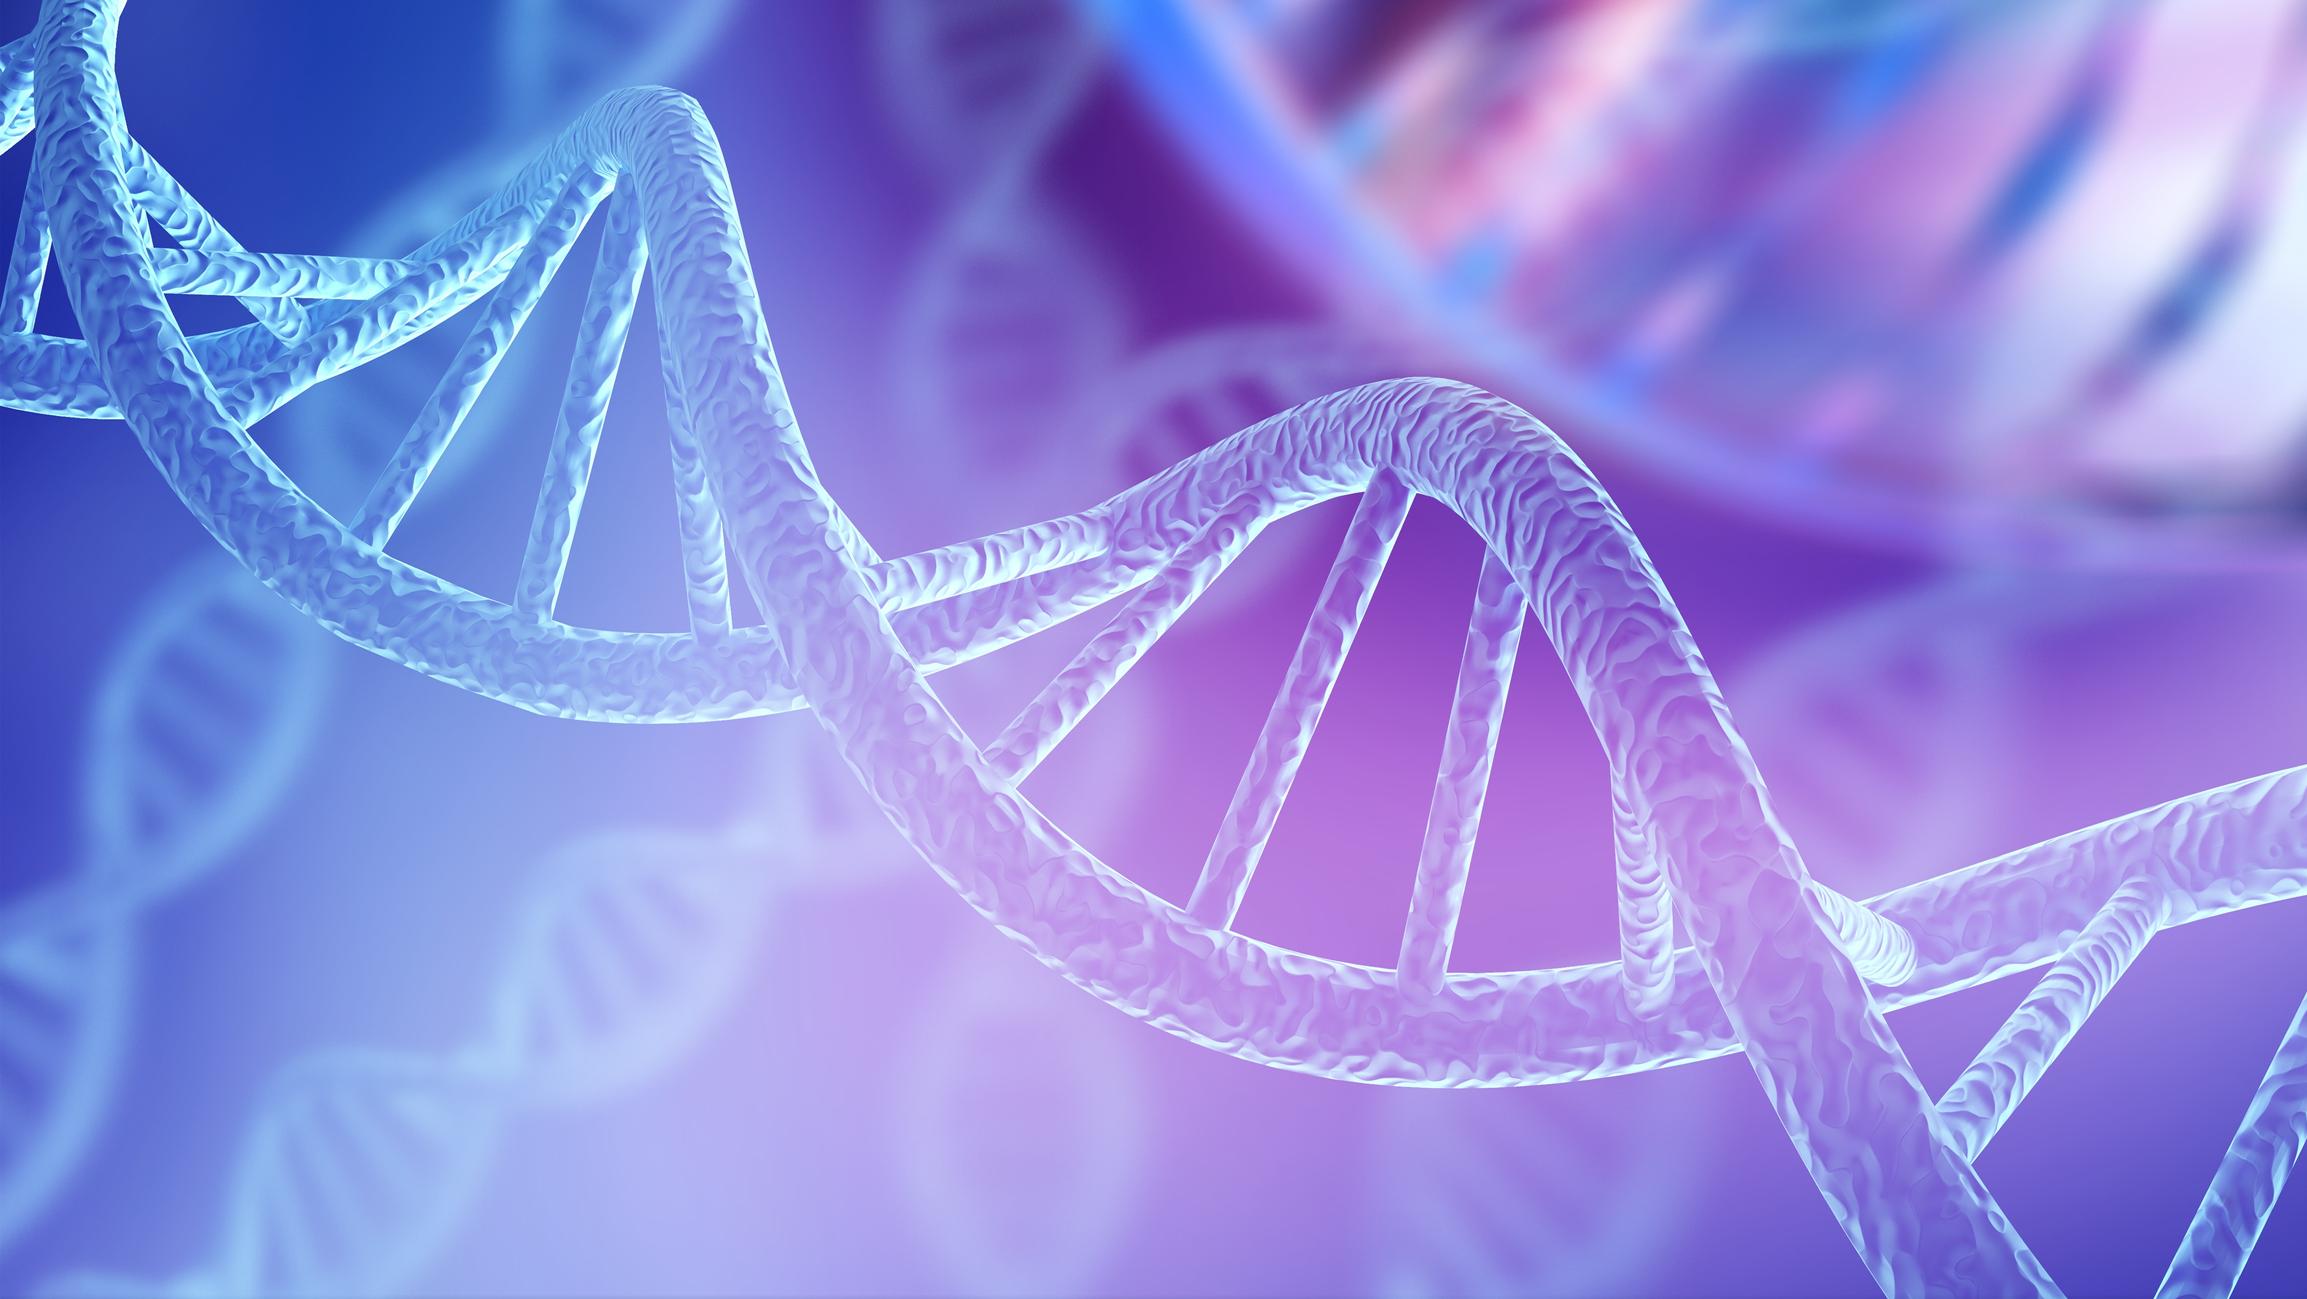 3D illustration of DNA helix structure on blue and purple background.